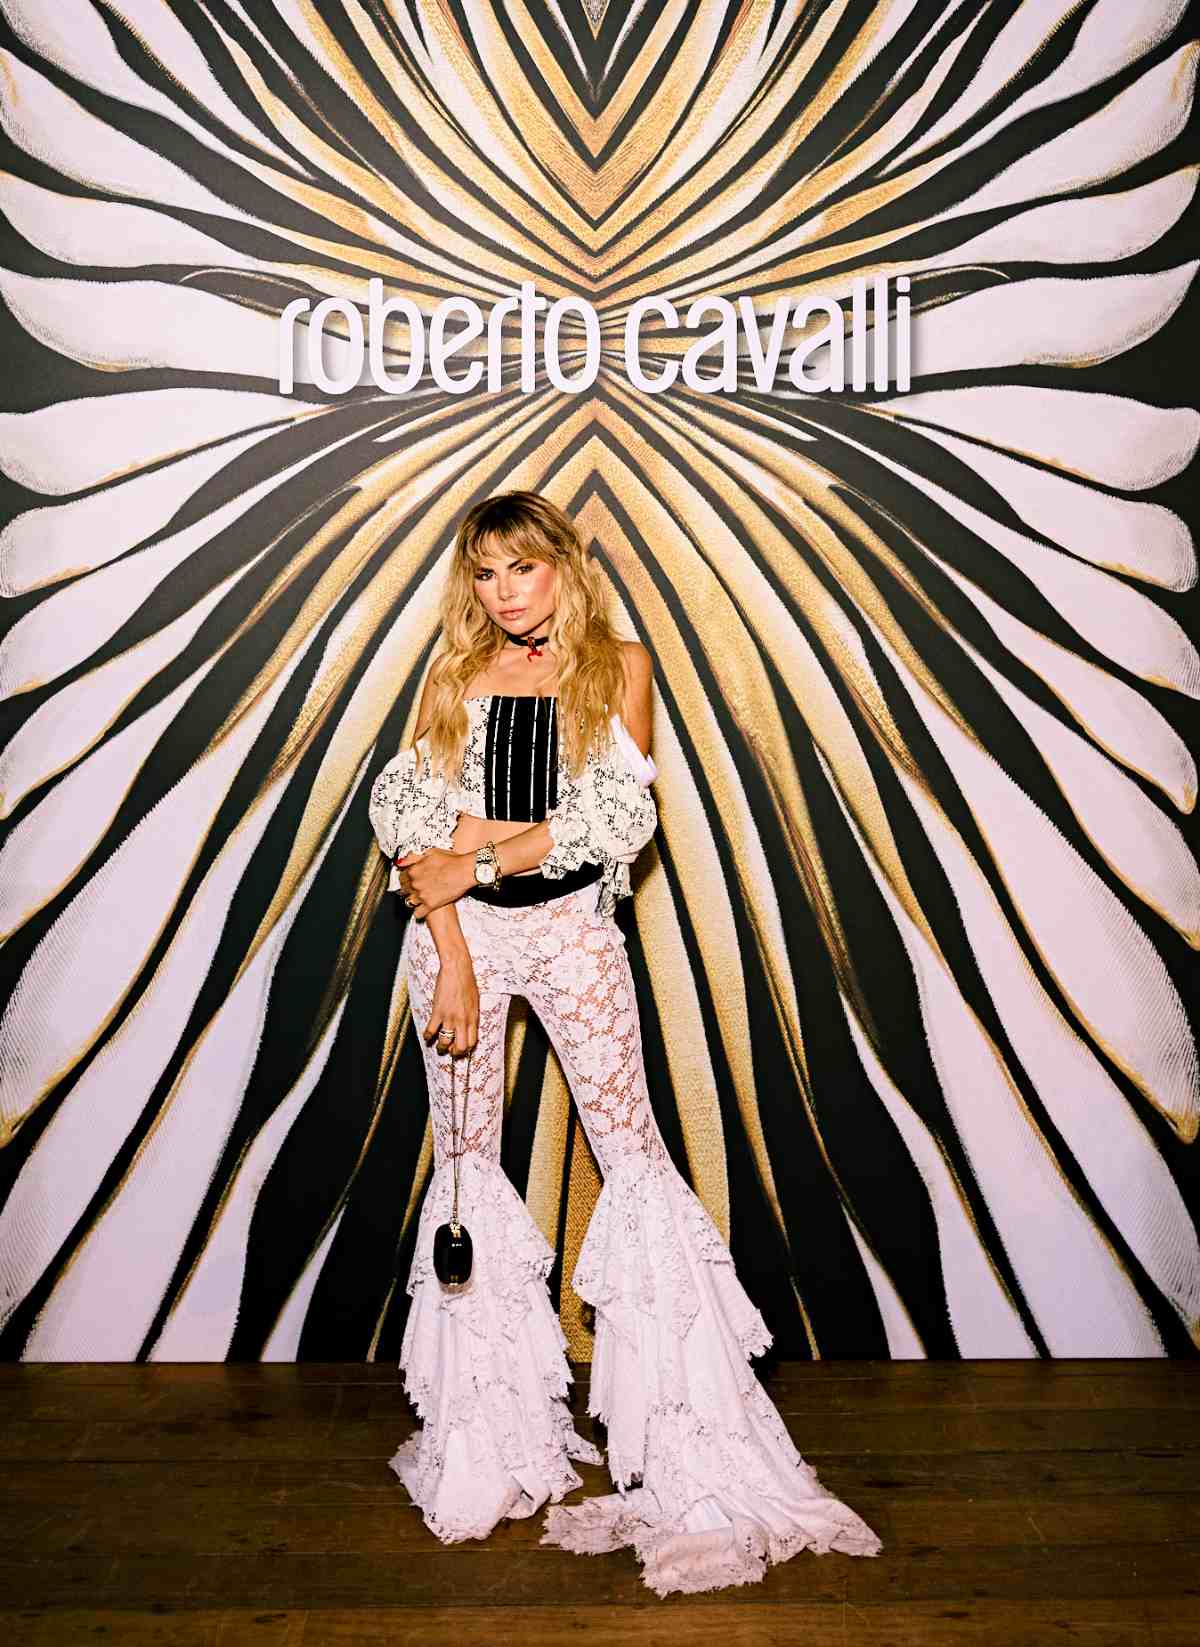 Roberto Cavalli’s Ray Of Gold Summer Begins In Cannes